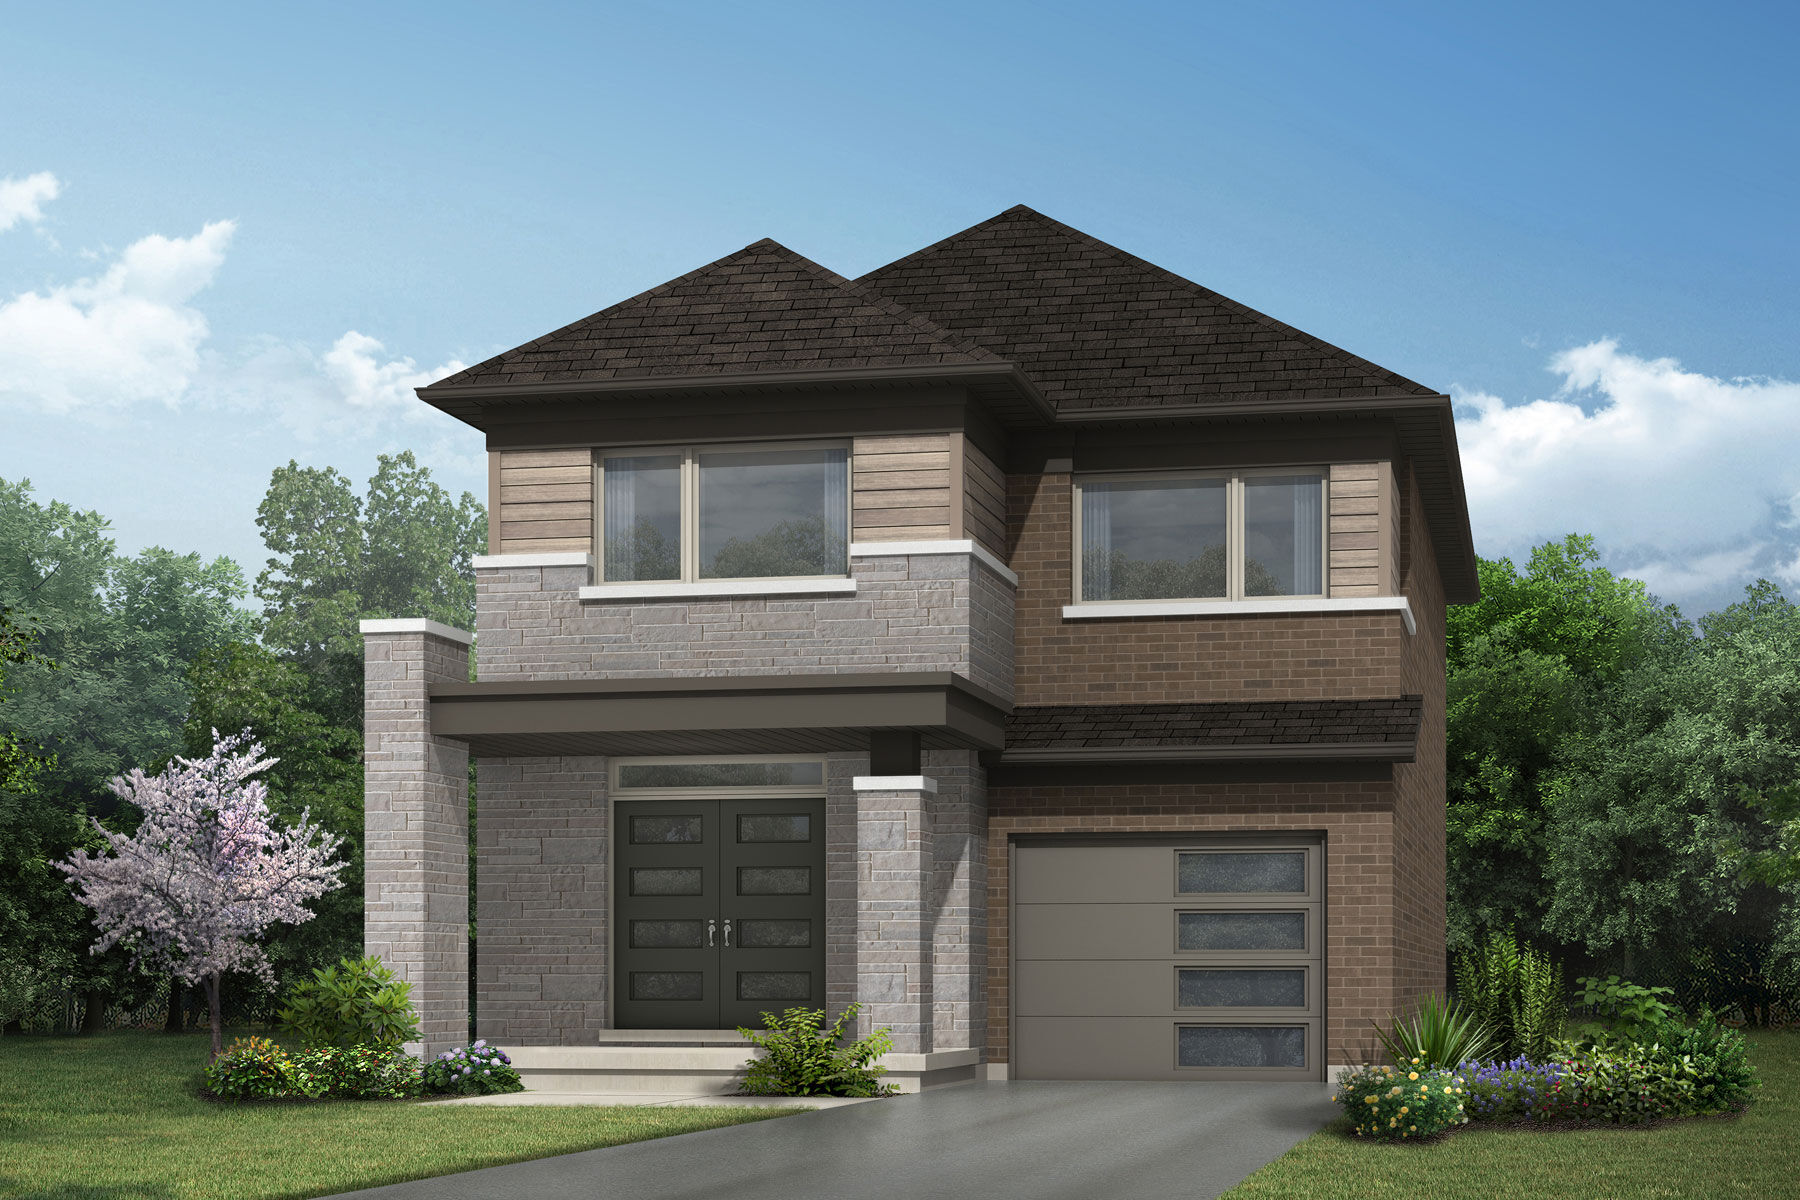  Elevation Front with garage, window and exterior stone